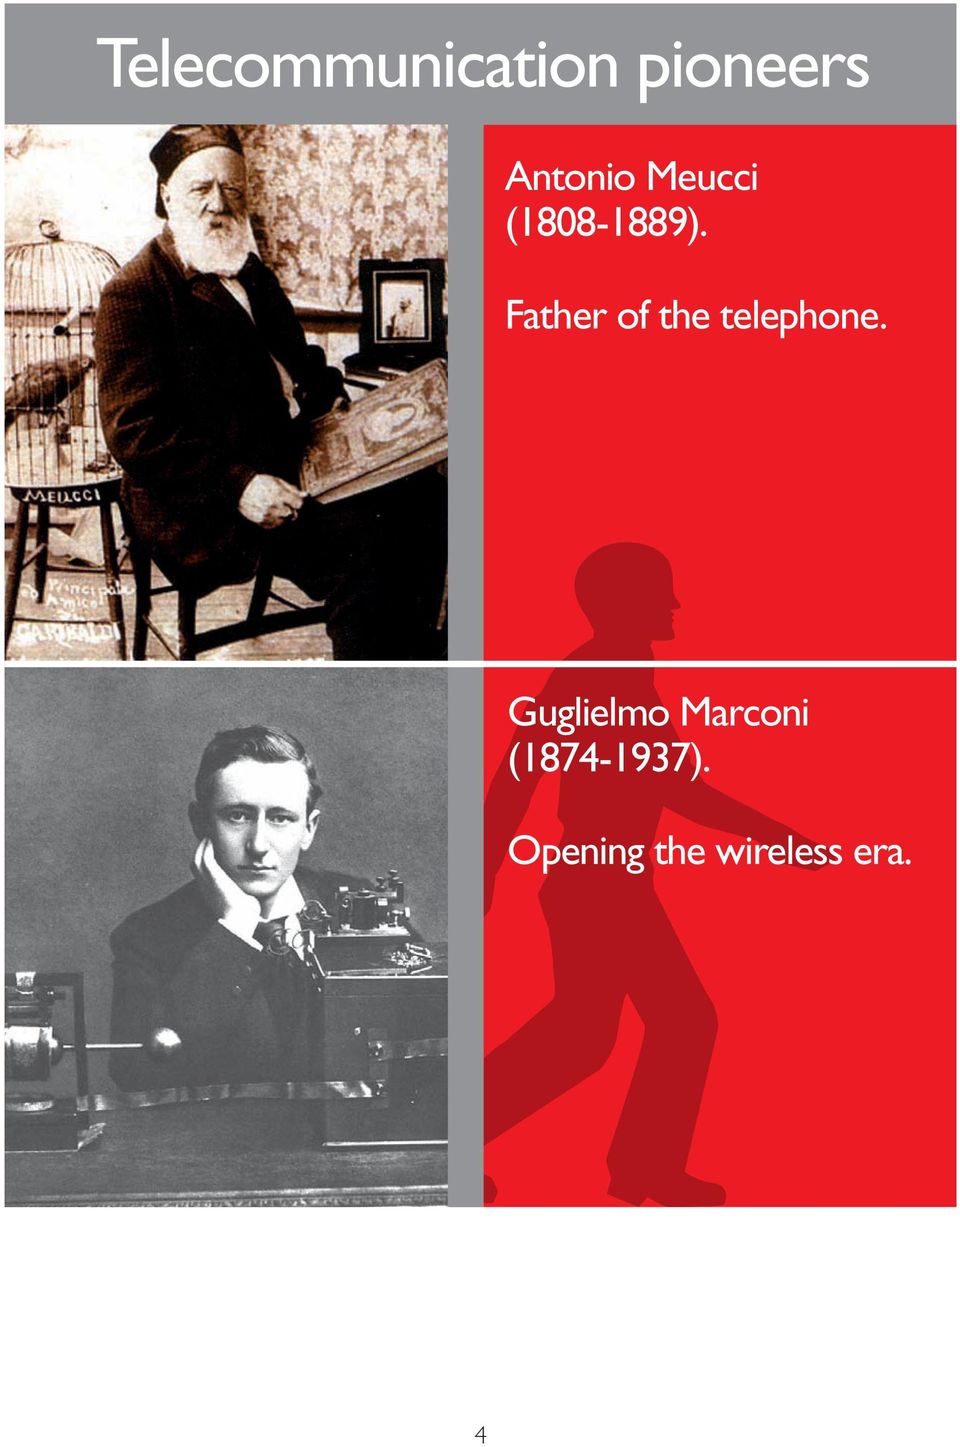 Father of the telephone.